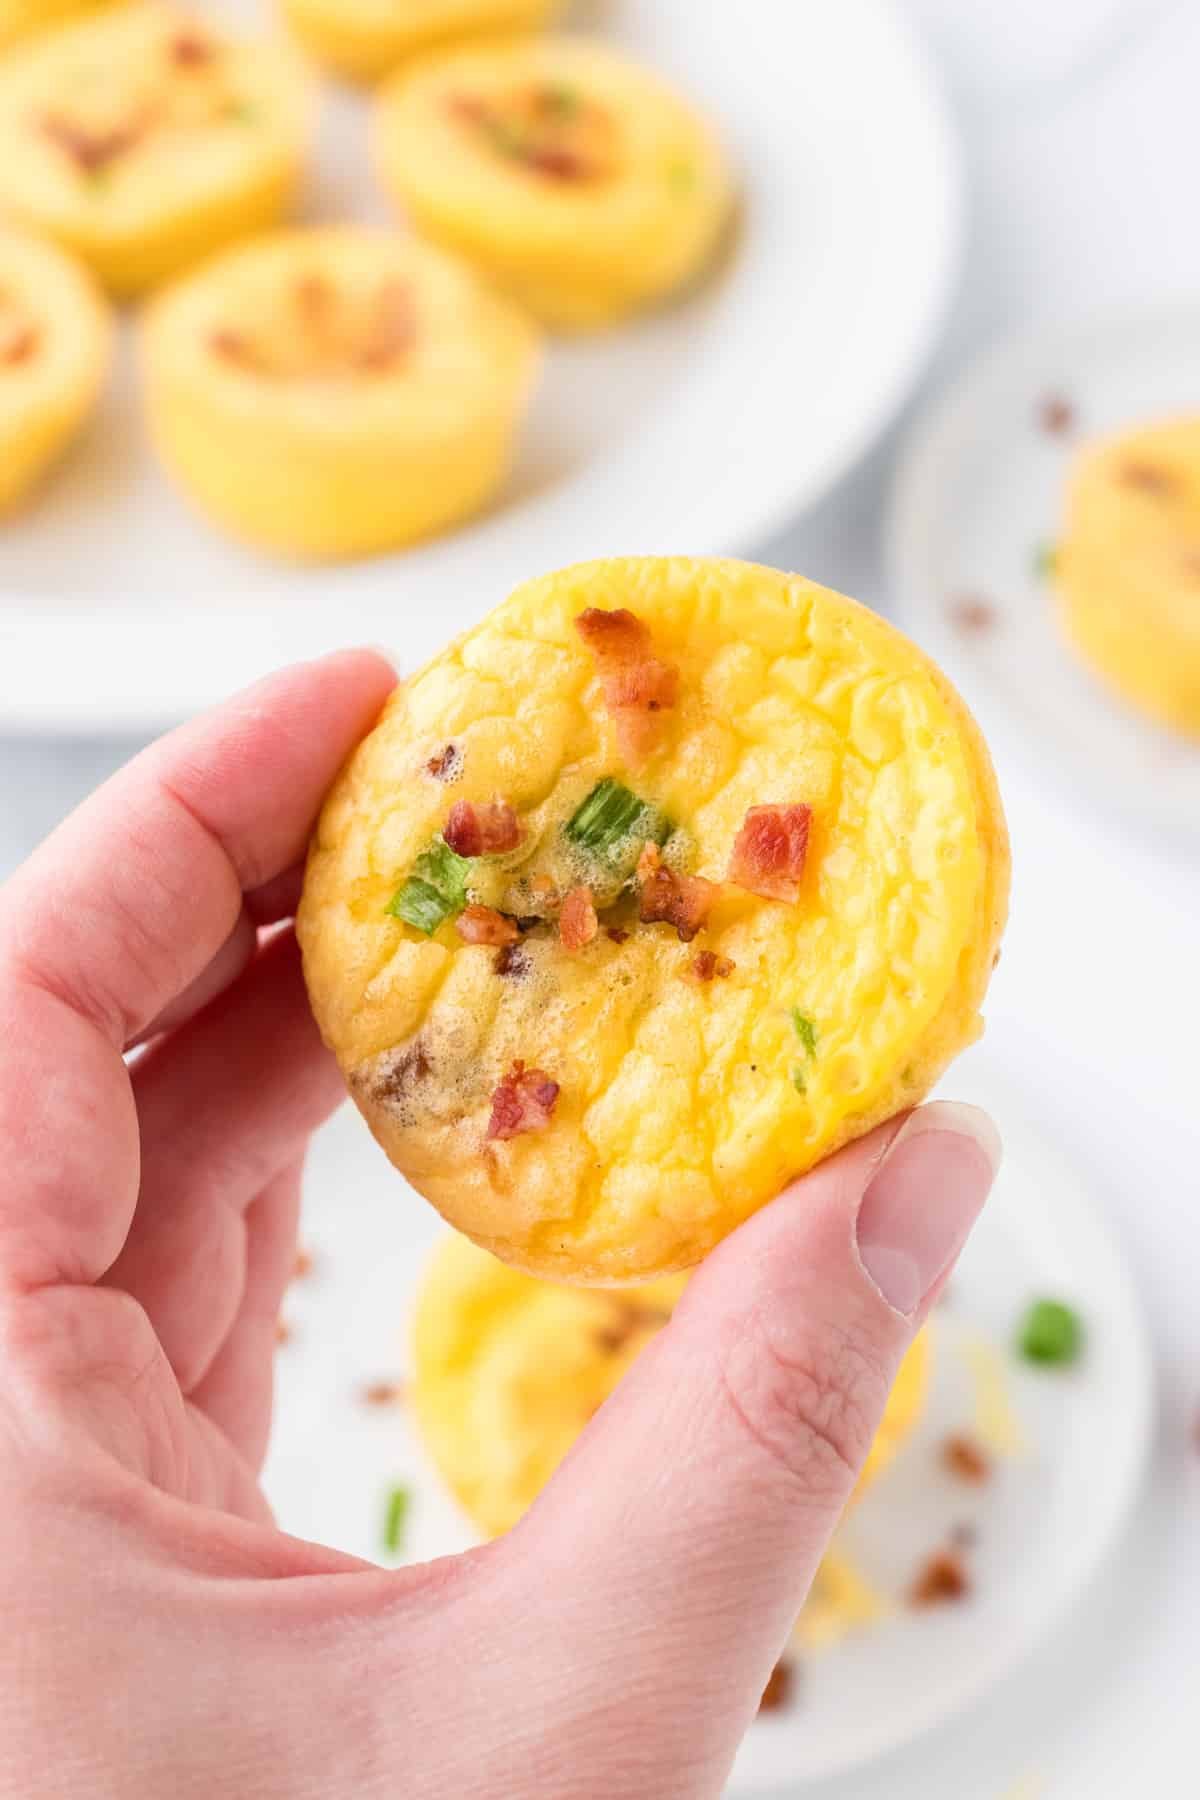 A hand holding an egg bite garnished with crumbled bacon and green onion.